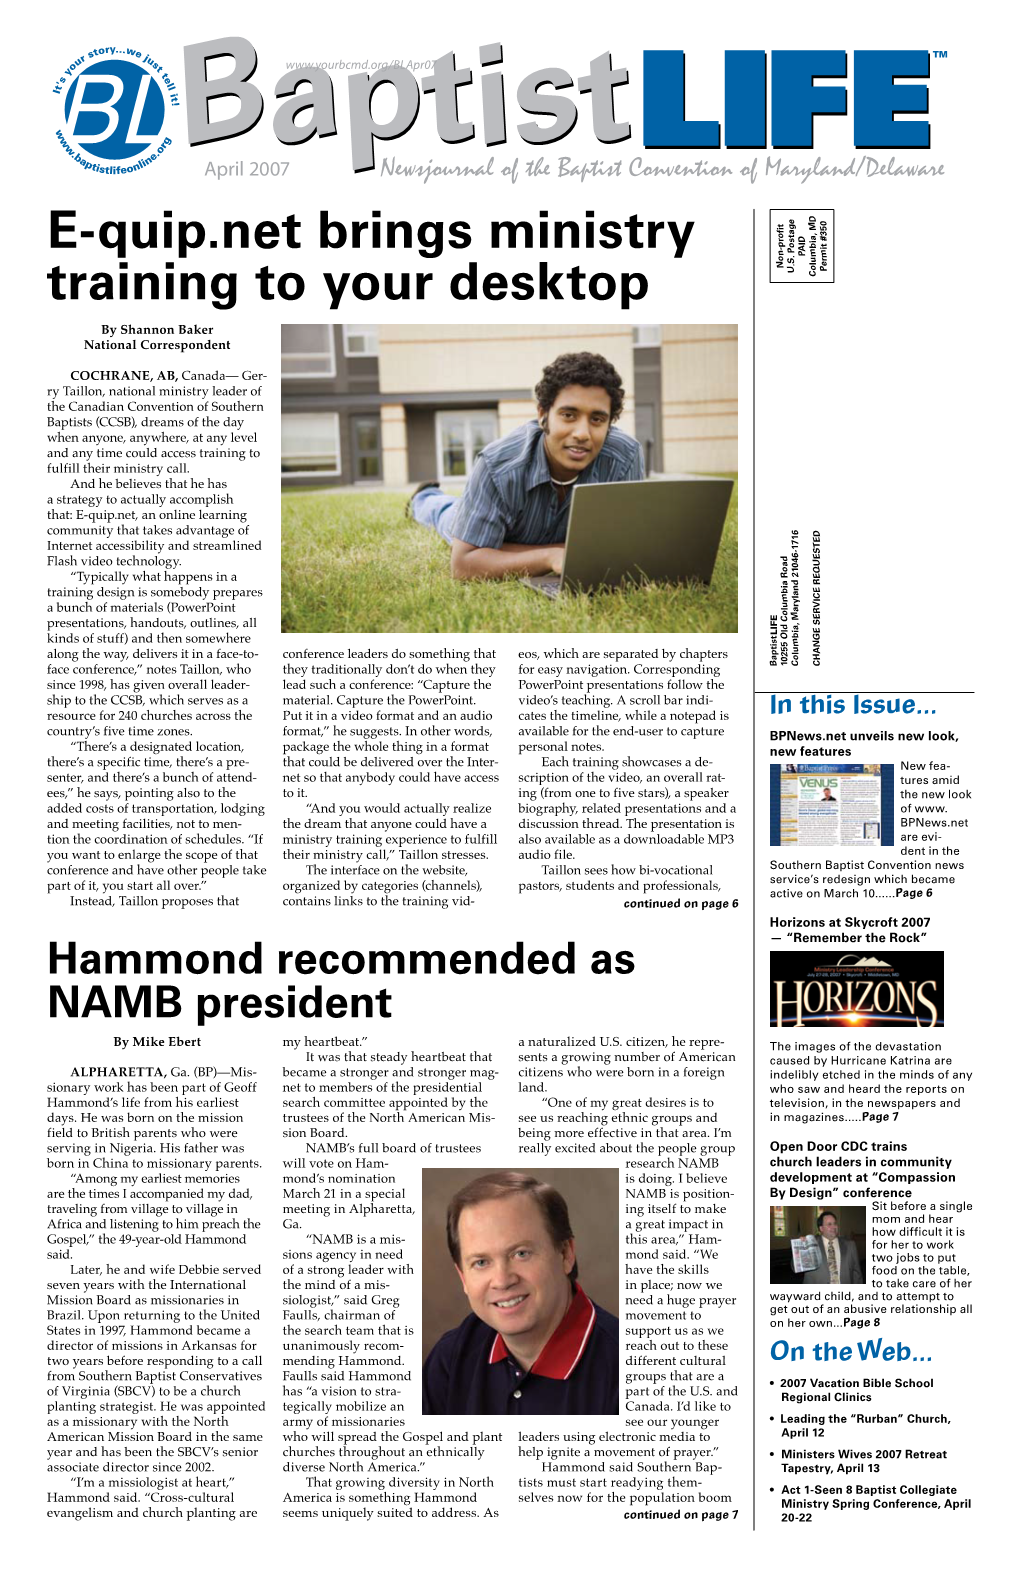 E-Quip.Net Brings Ministry Training to Your Desktop Continued from Page 1 with the BCM/D As a Manager for Their E-Quip.Net Website